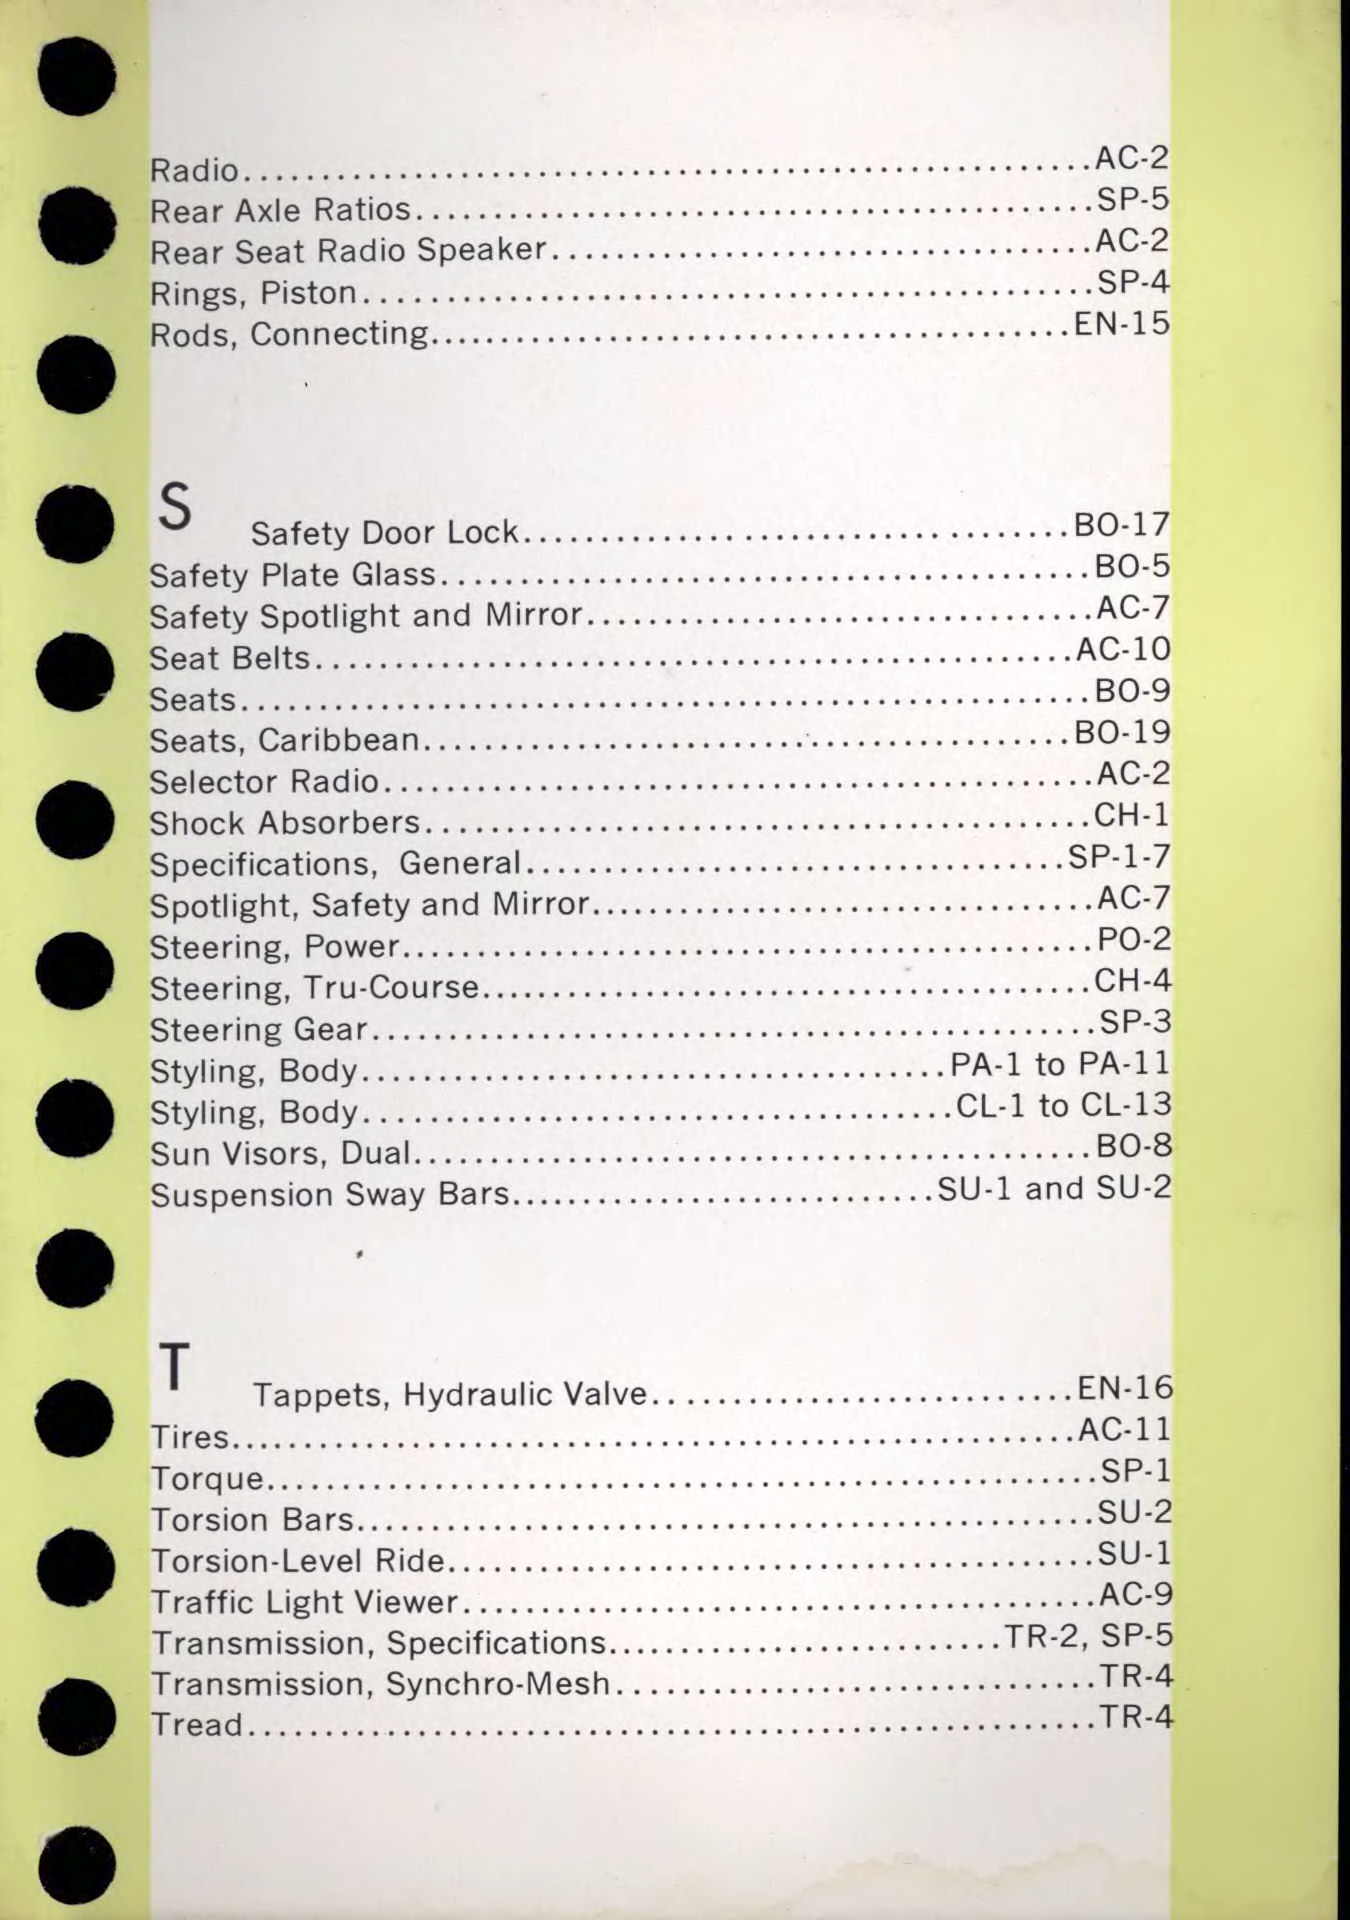 1956 Packard Data Book Page 59